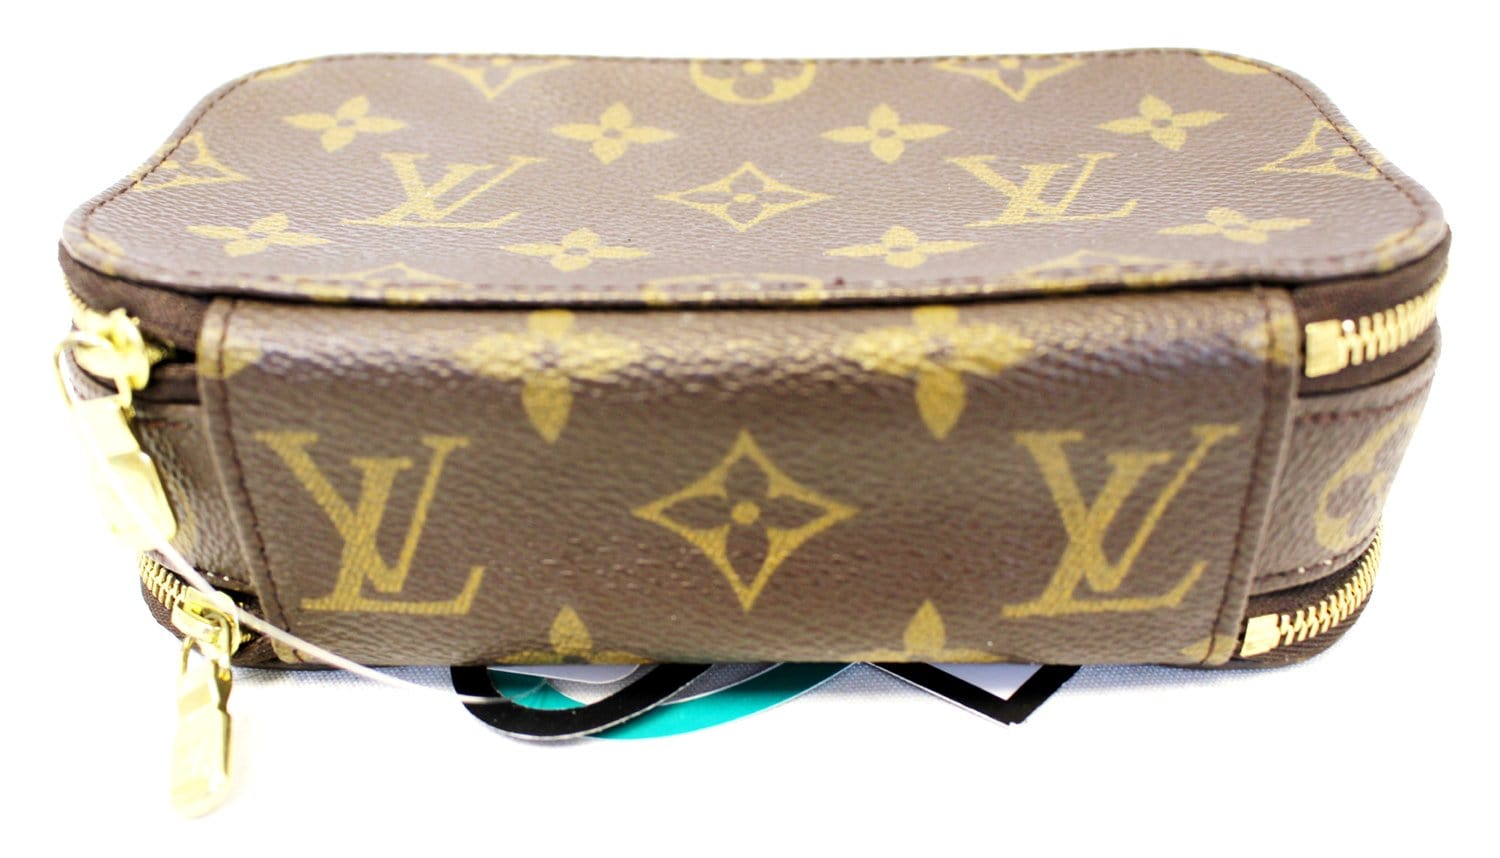 Lv Monogram Canvas Cosmetic Bag M61113 2020 Collection